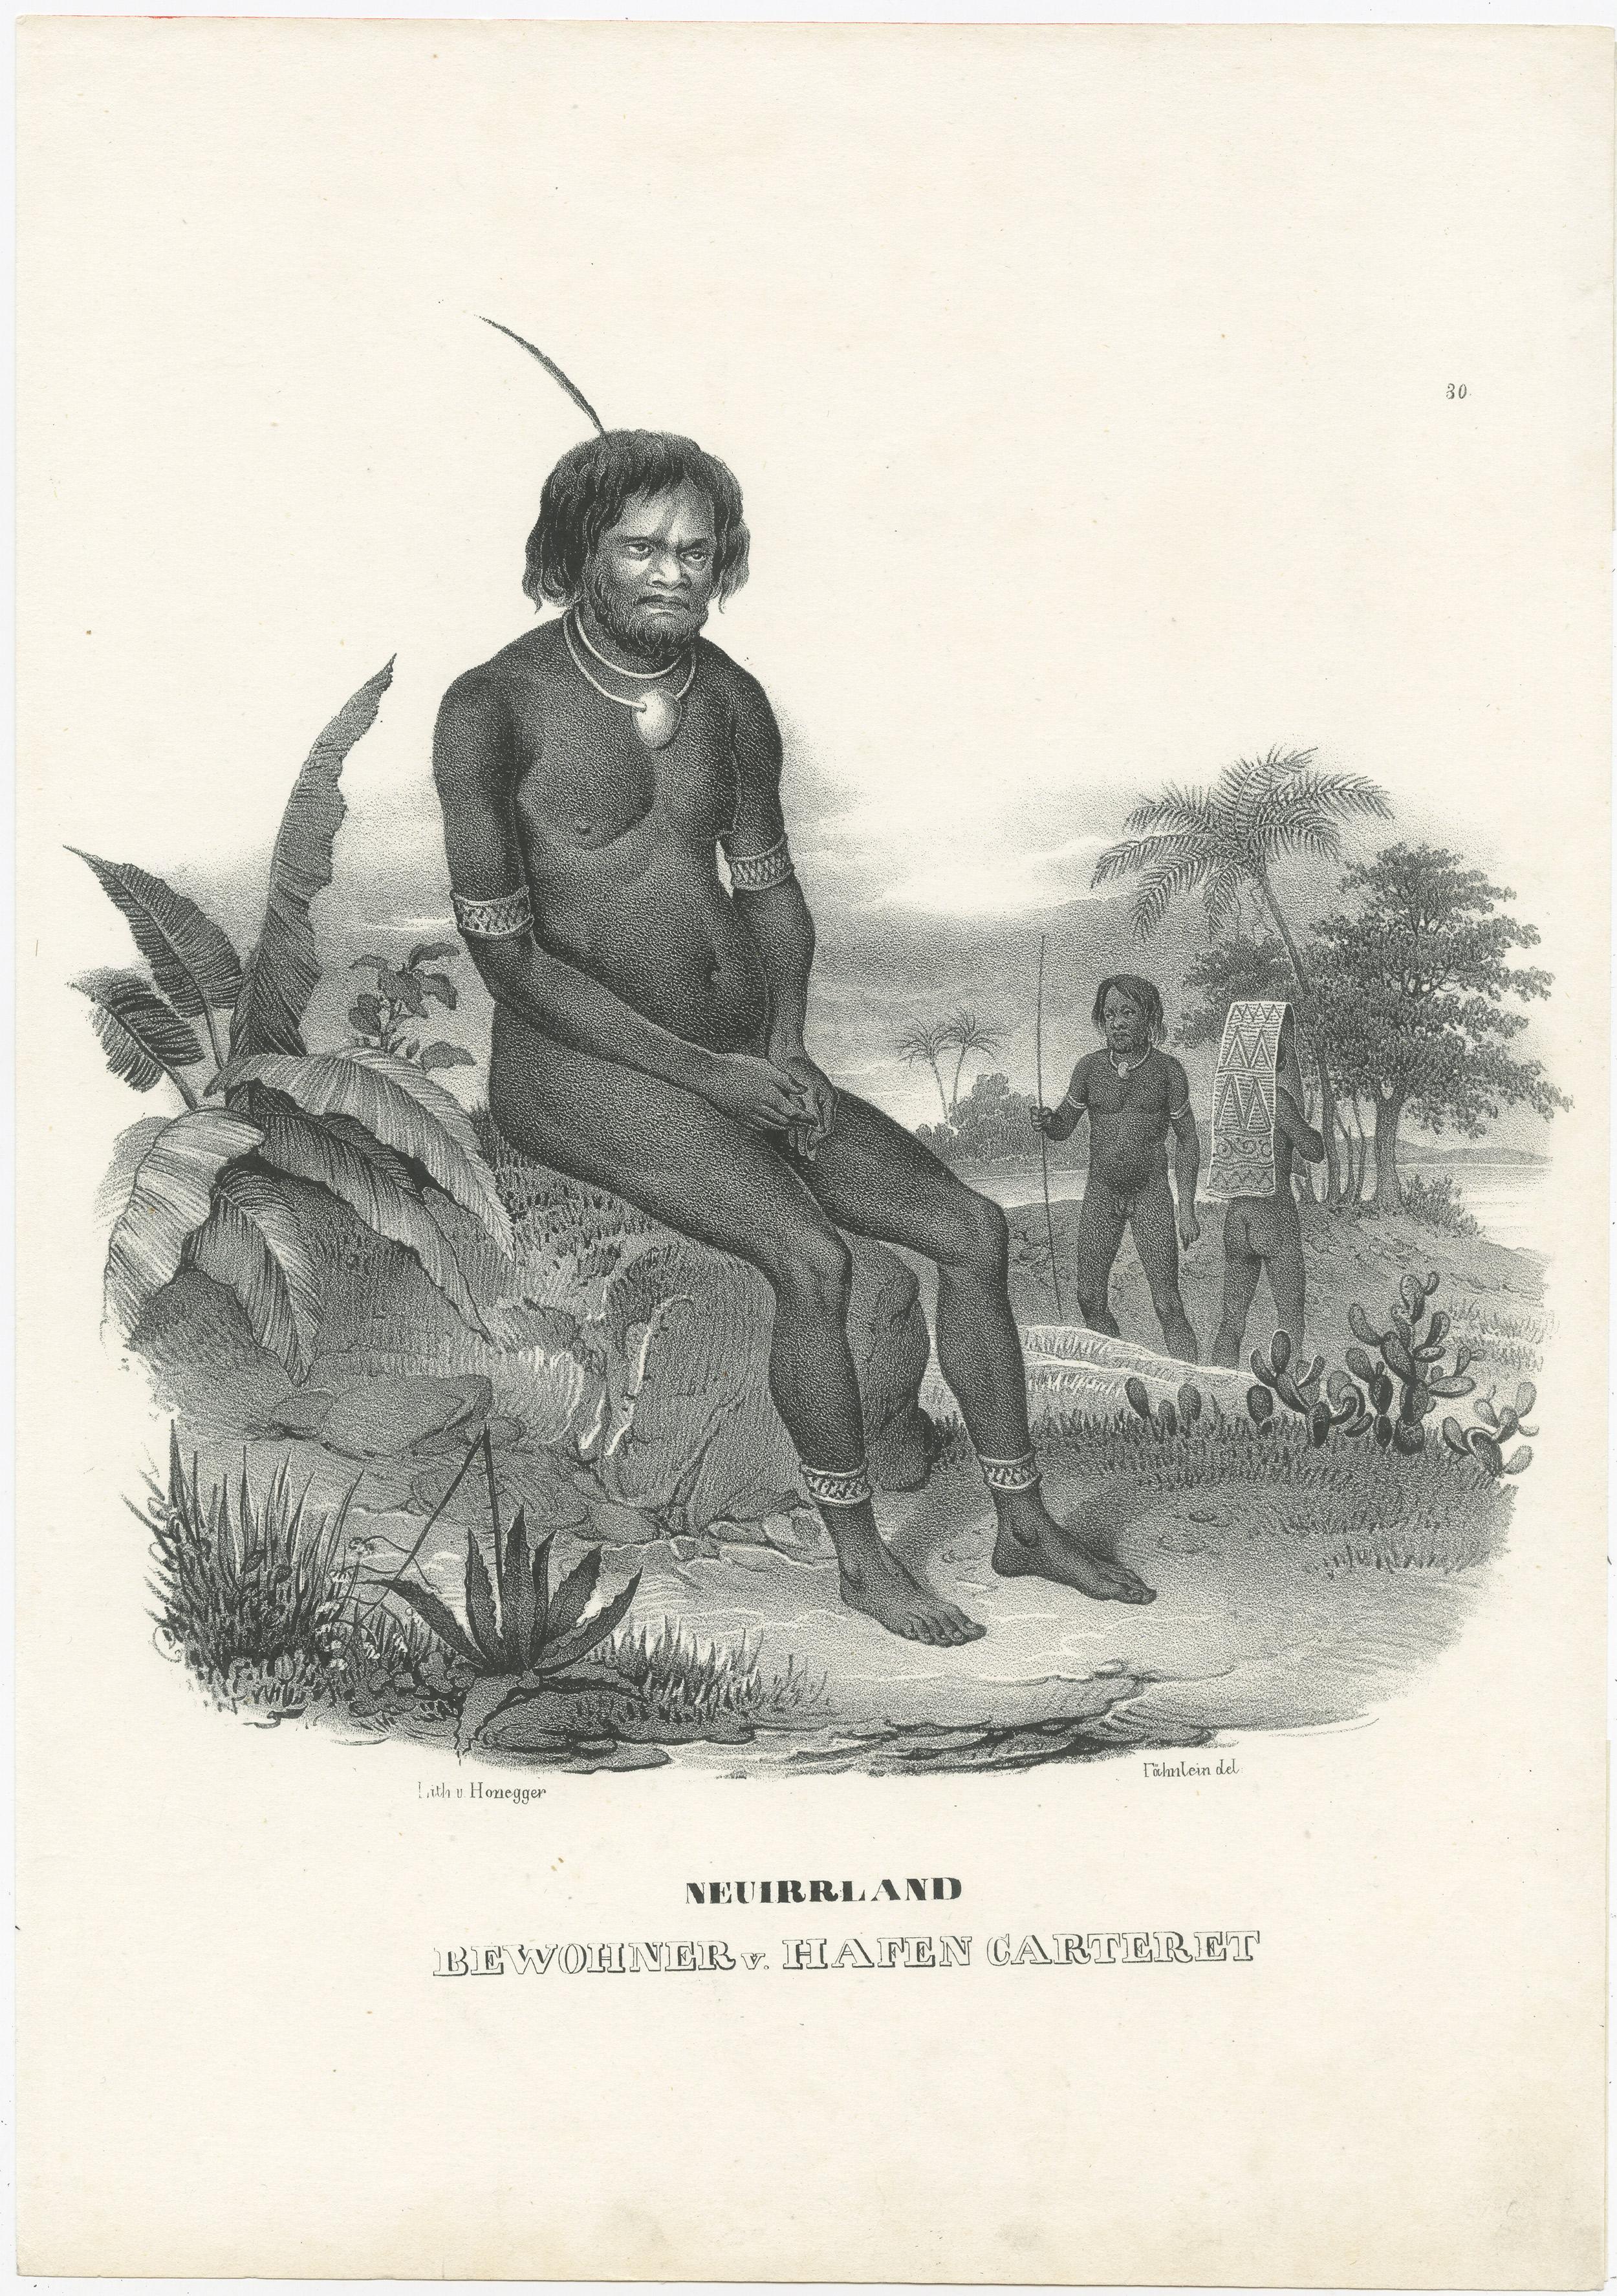 Antique print titled 'Neuirrland, Bewohner v. Hafen Carteret'. Male native of the Bismarck Archipelago, seated on an overgrown rock, two fellow tribesmen on the right, one with a plaited mat over his head. The port of Carteret was on the southern